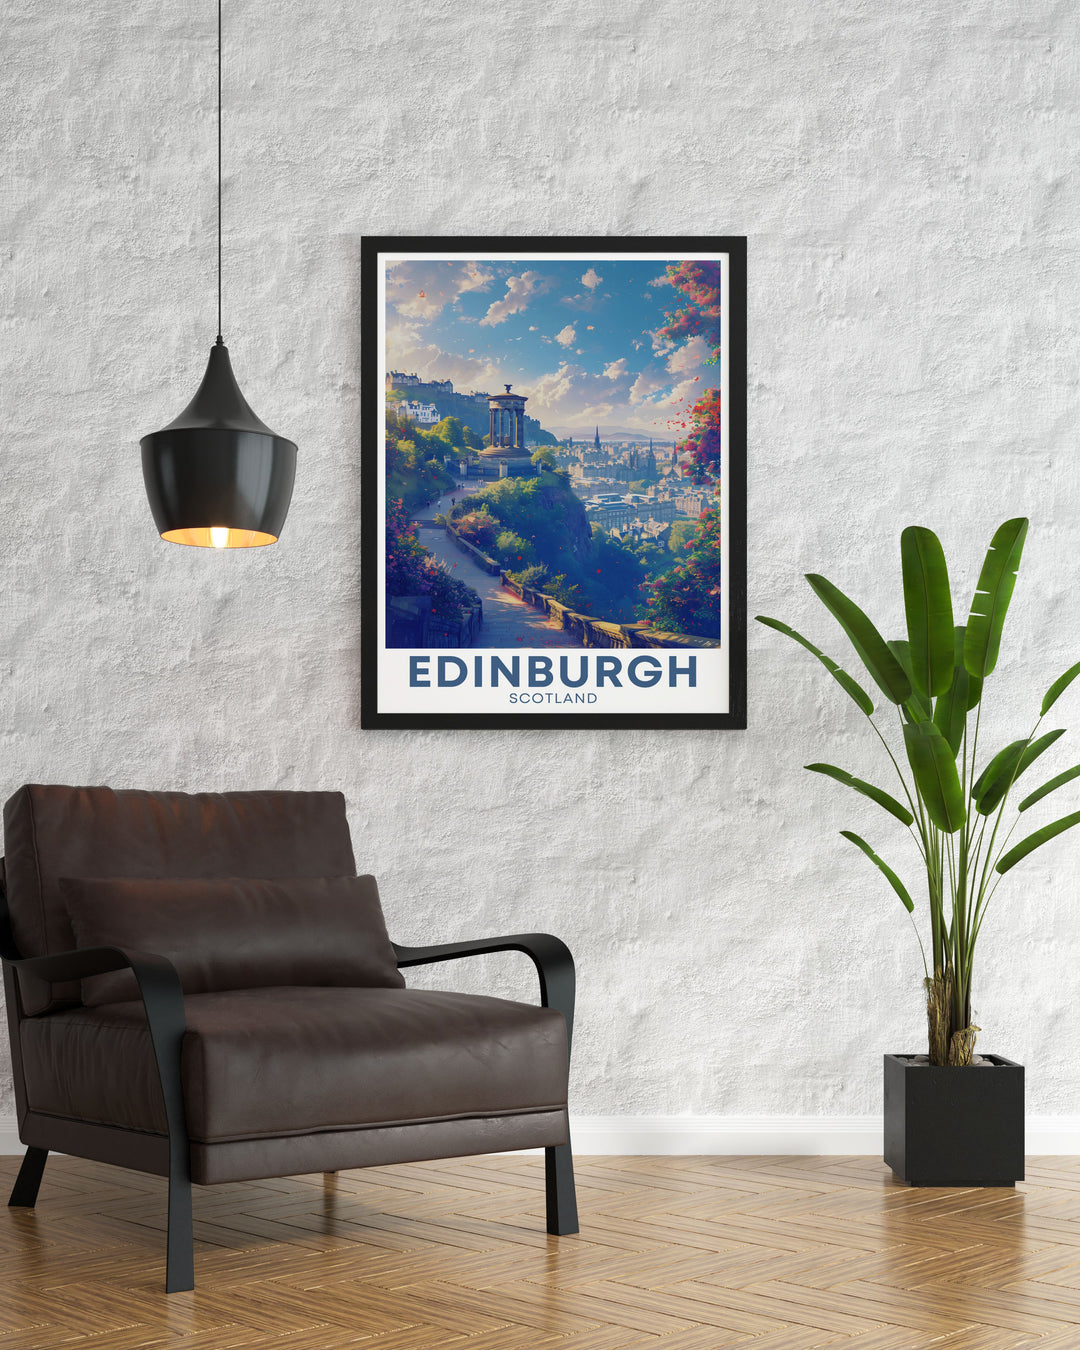 A detailed print of Edinburgh showcasing the panoramic views from Calton Hill, highlighting the historic and natural beauty of Scotlands capital.